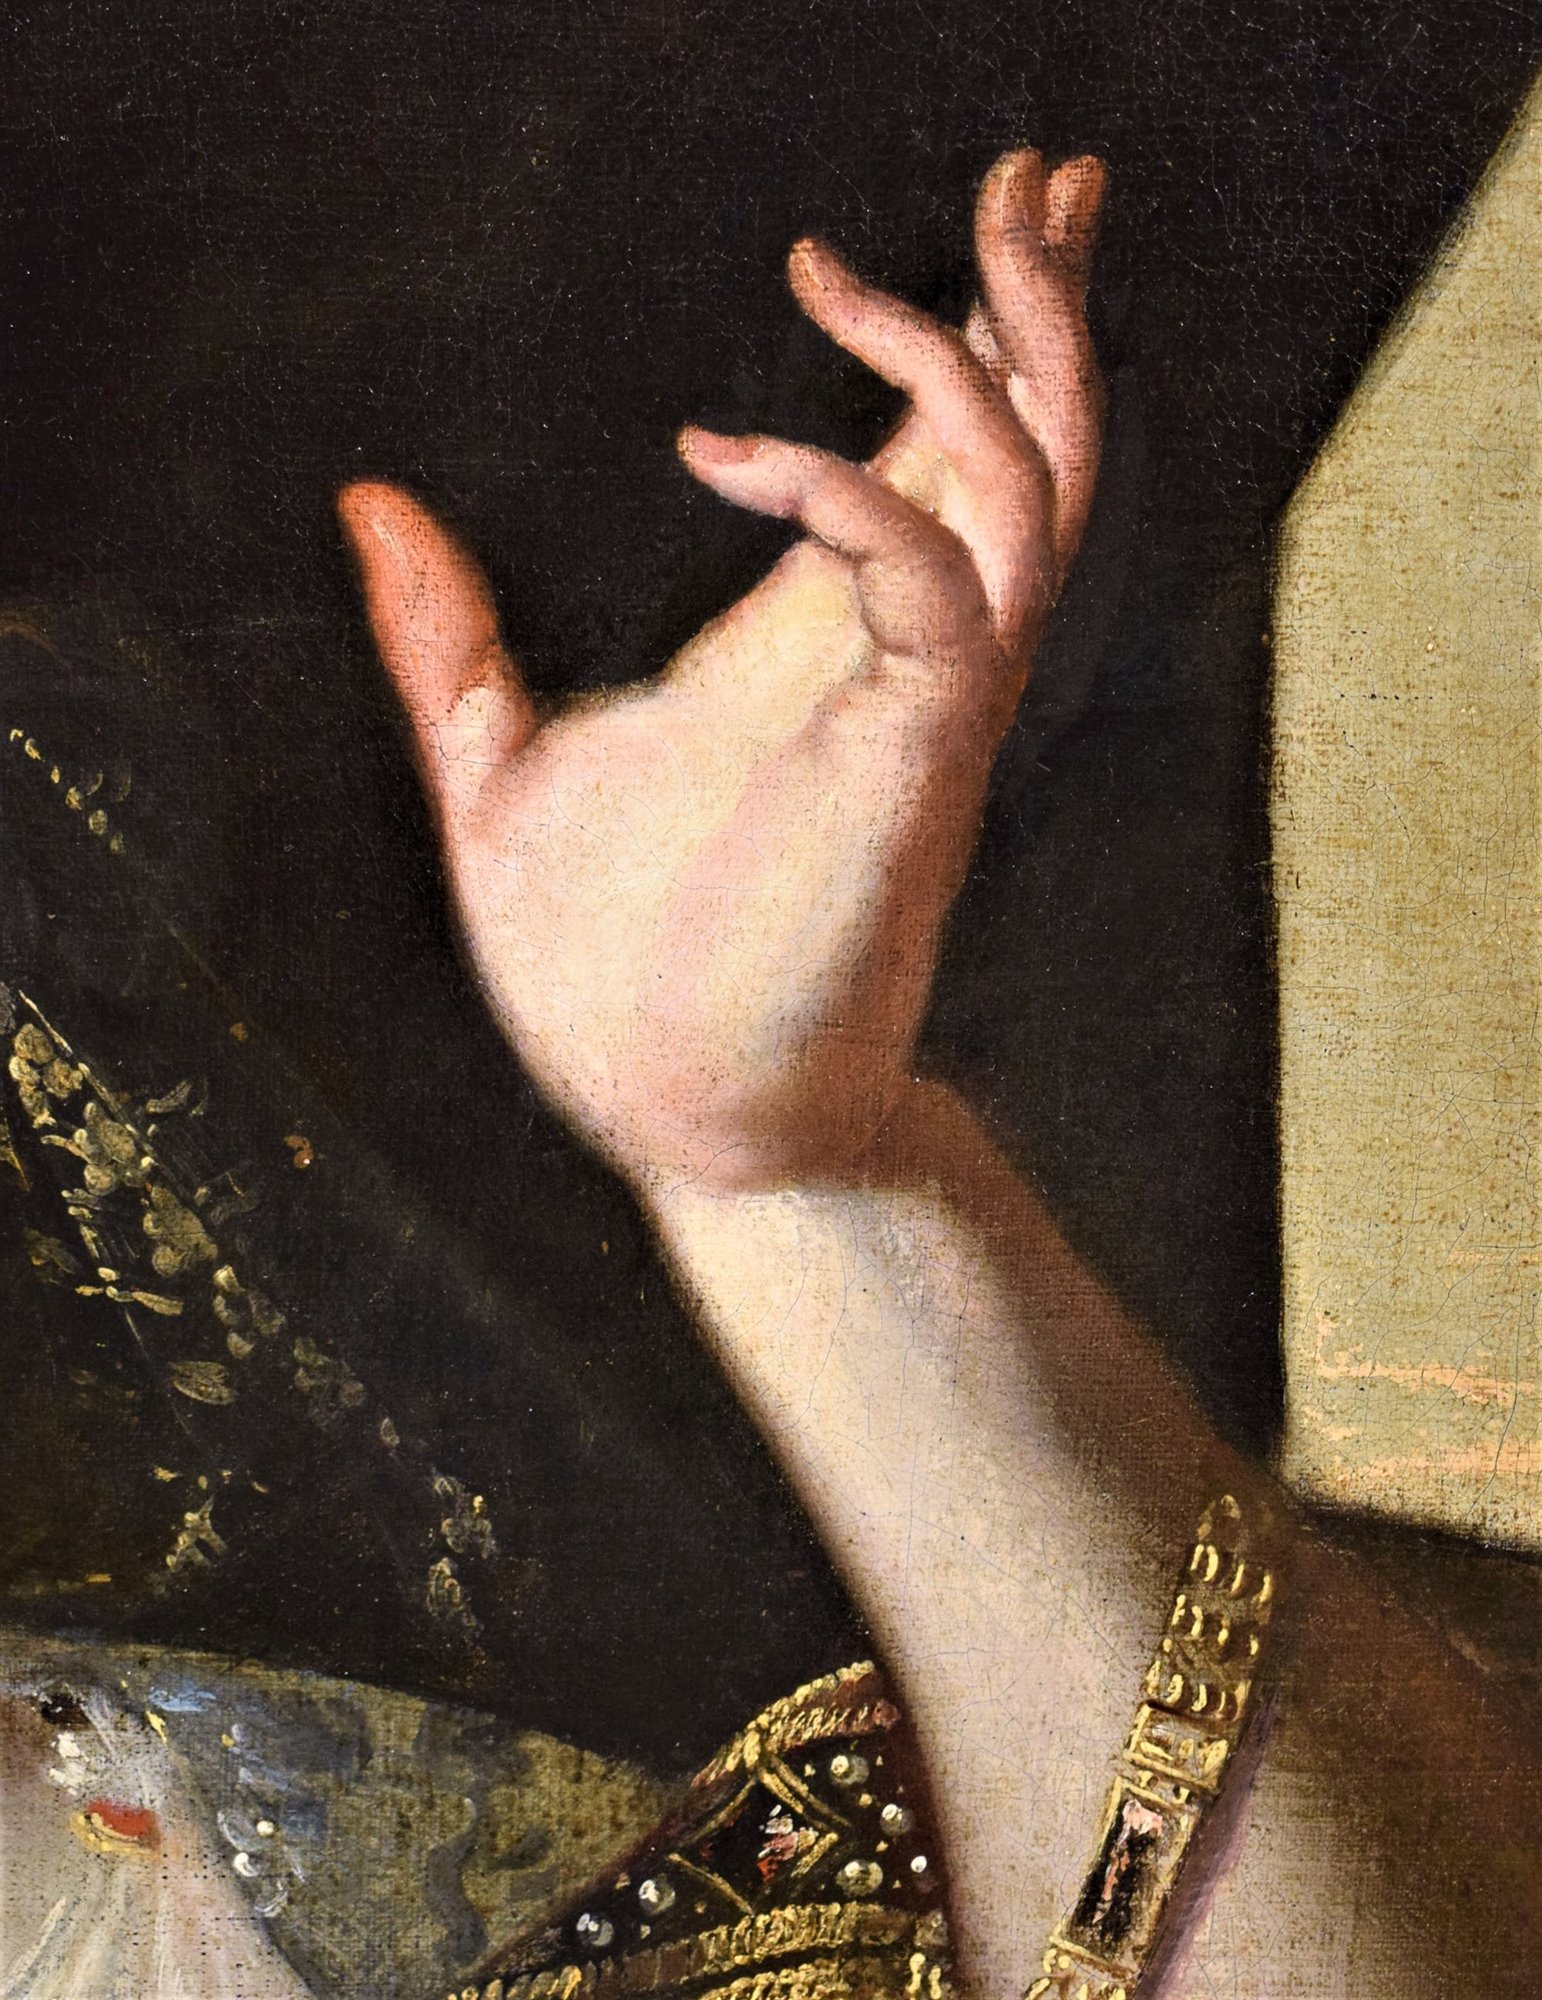 "Allegory of Touch"